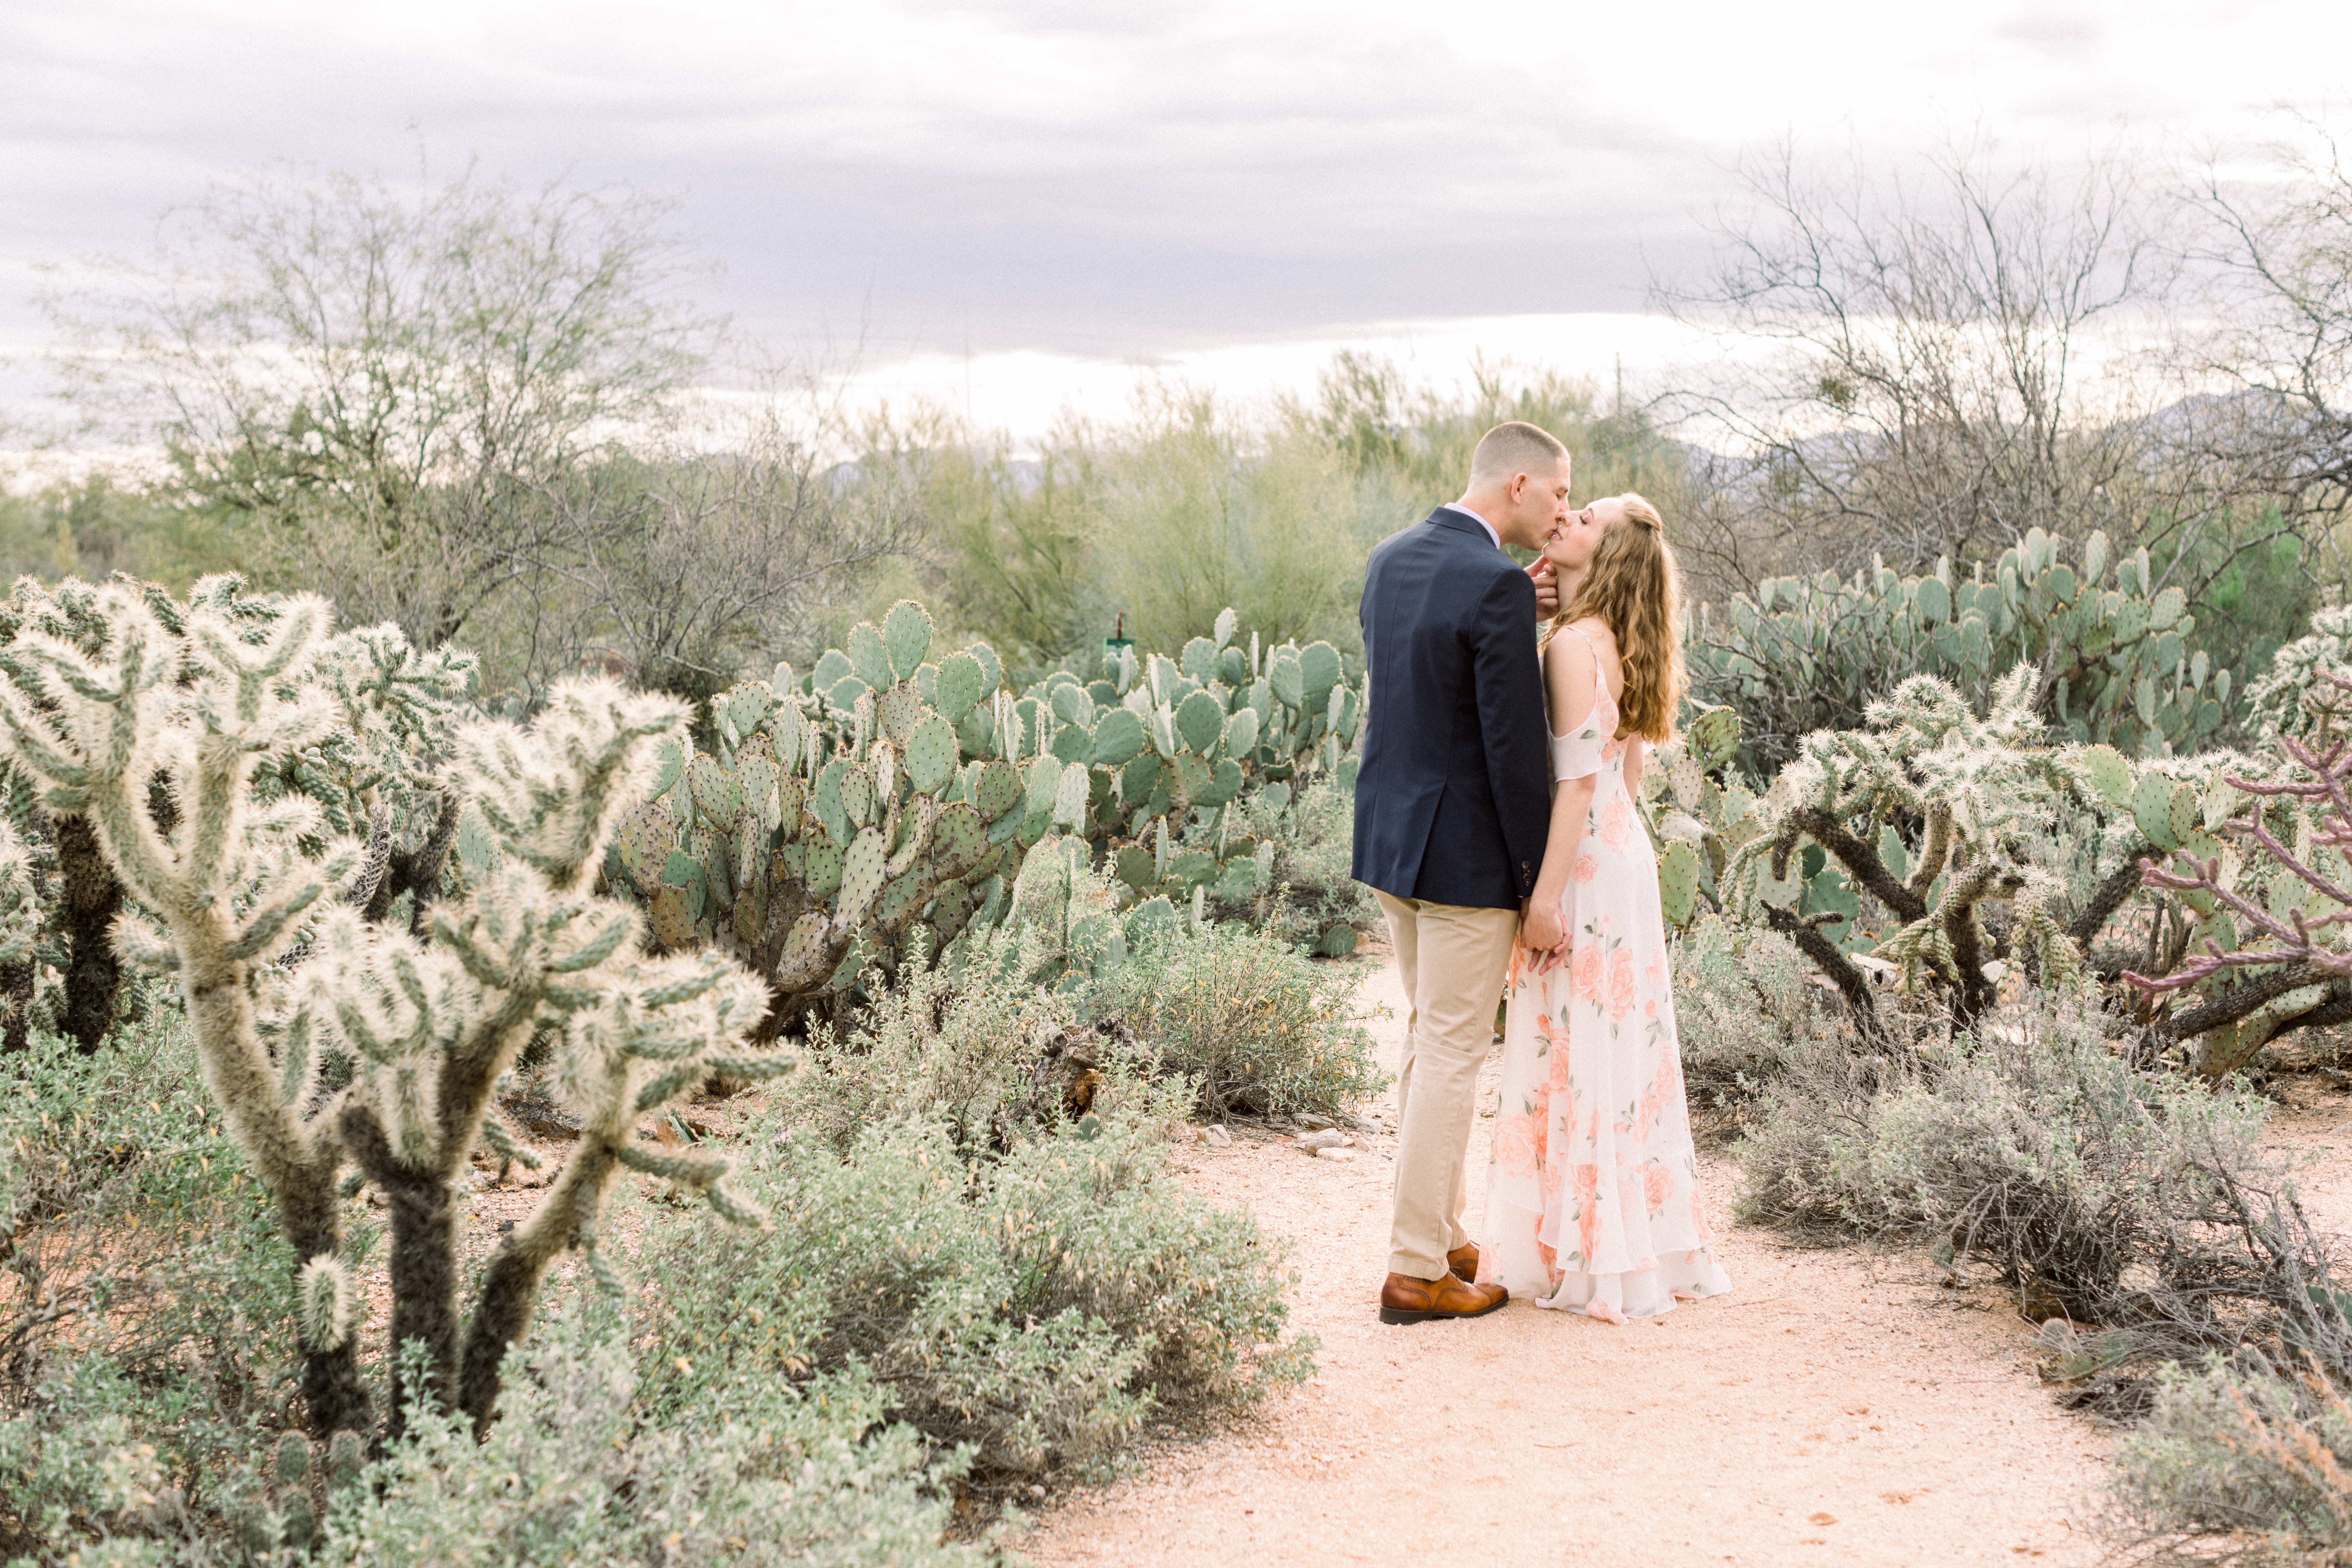 Tohono Chul Park Engagement Session with a woman in a flowery dress and man in a suit, kissing. Photo by Amber Lea Photography.